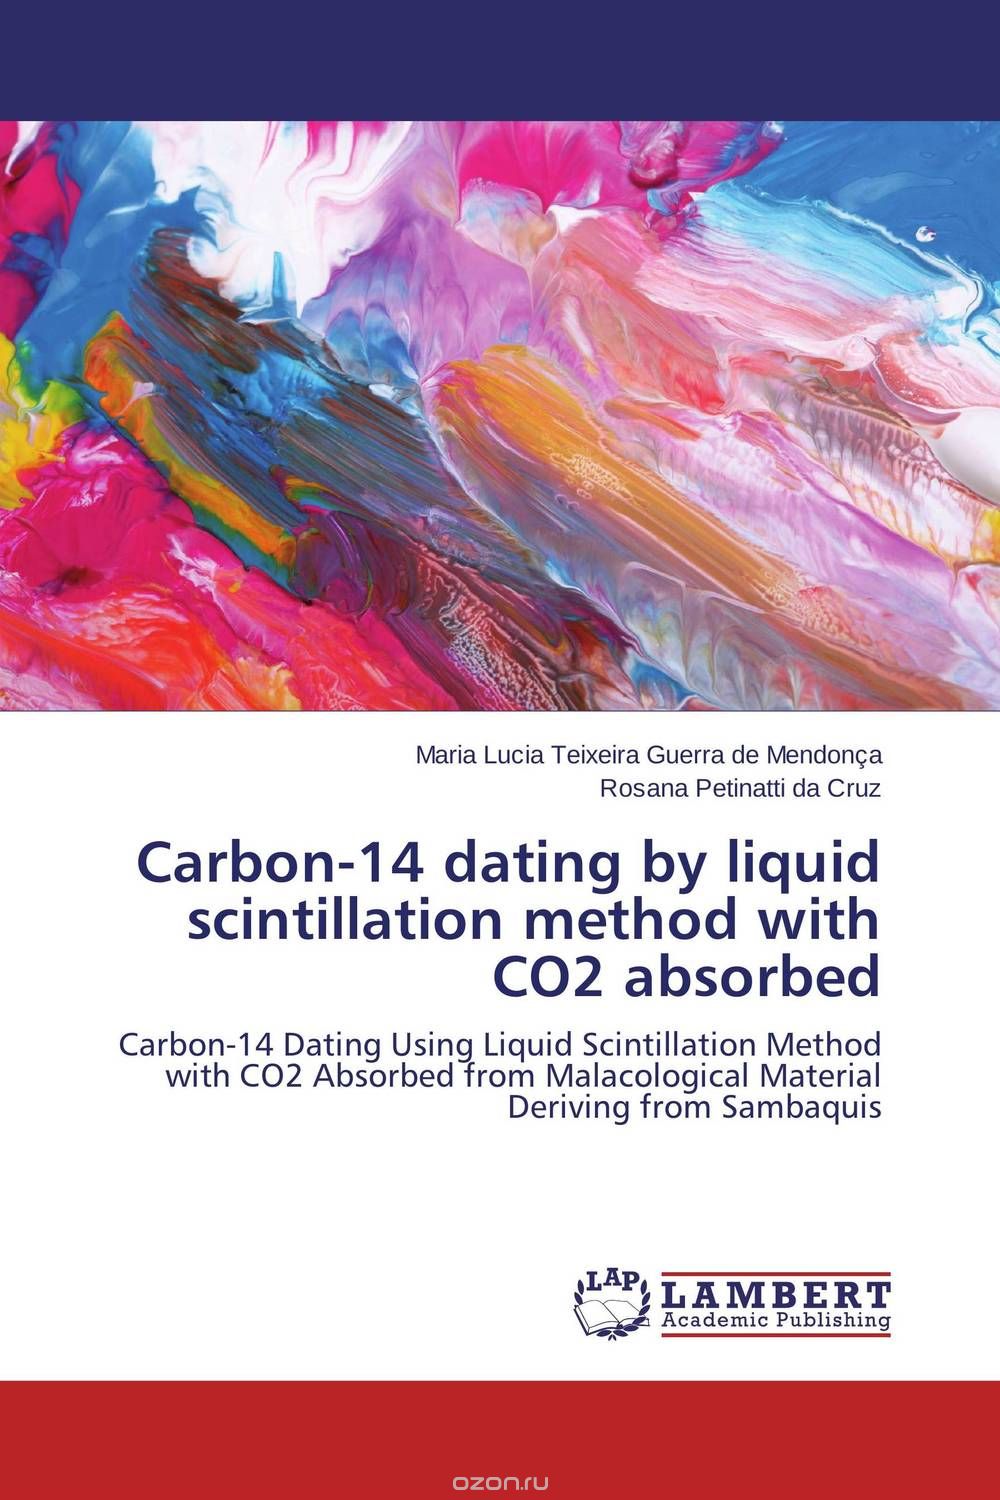 Carbon-14 dating by liquid scintillation method with CO2 absorbed